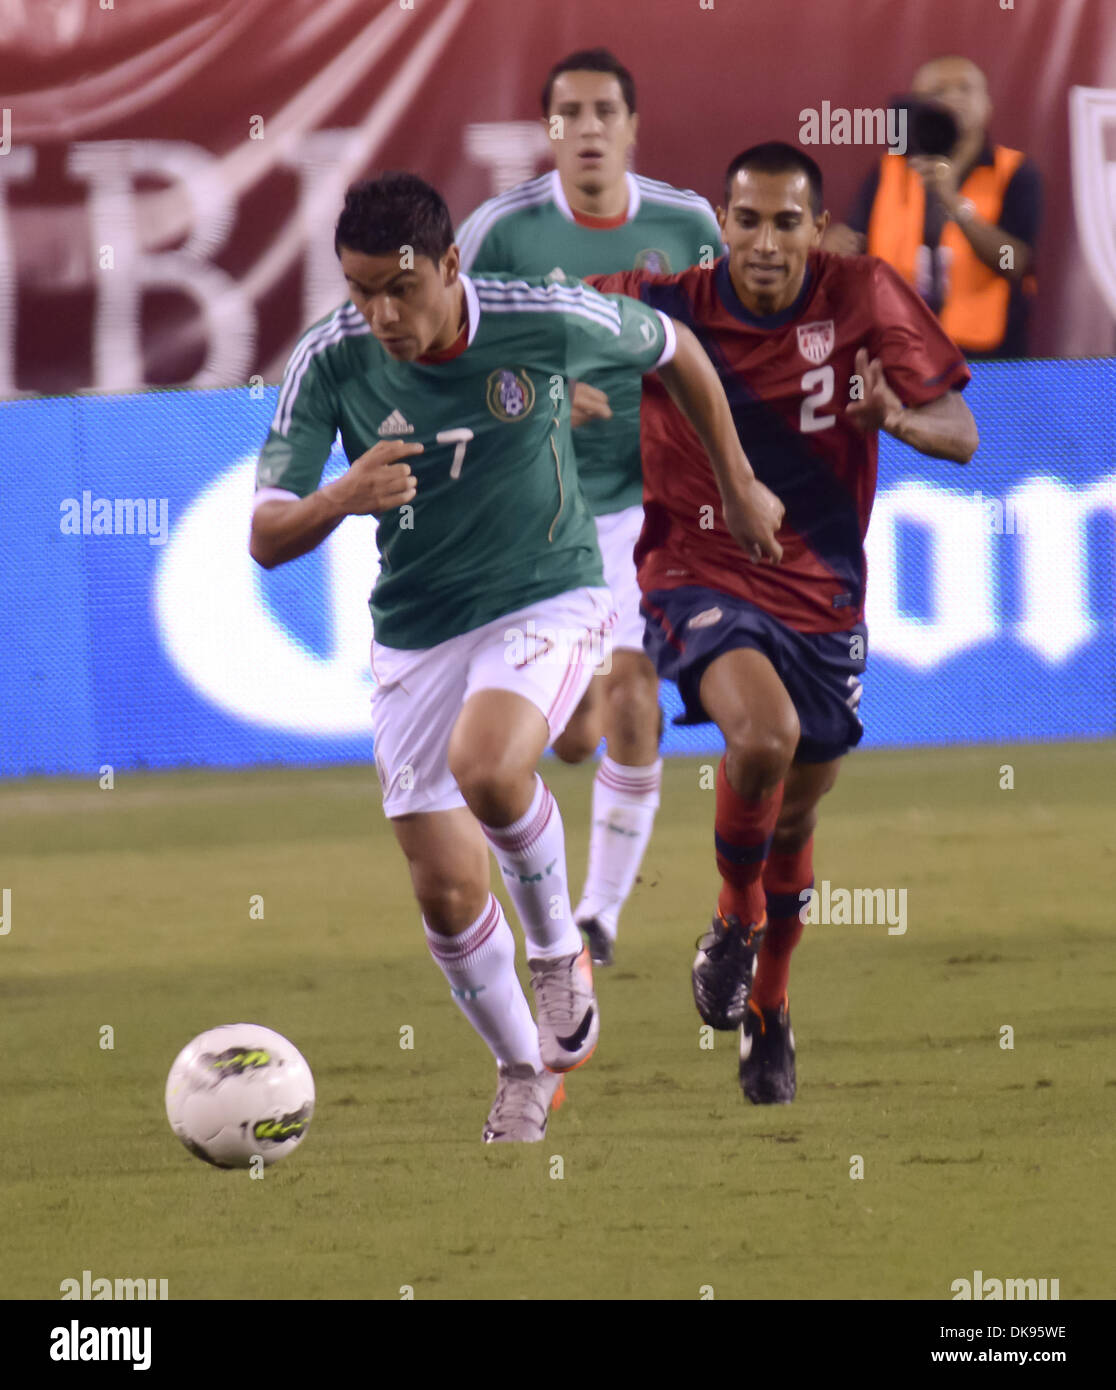 Aug. 10, 2011 - Philadelphia, PA, USA - US National Team player, EDGAR CASTILLO, fights for the ball against Mexico player, FRANCISCO JAVIER RODRIGUEZ, during a friendly match with Mexico held at Lincoln Financial Field in Philadelphia Pa. (Credit Image: © Ricky Fitchett/ZUMAPRESS.com) Stock Photo